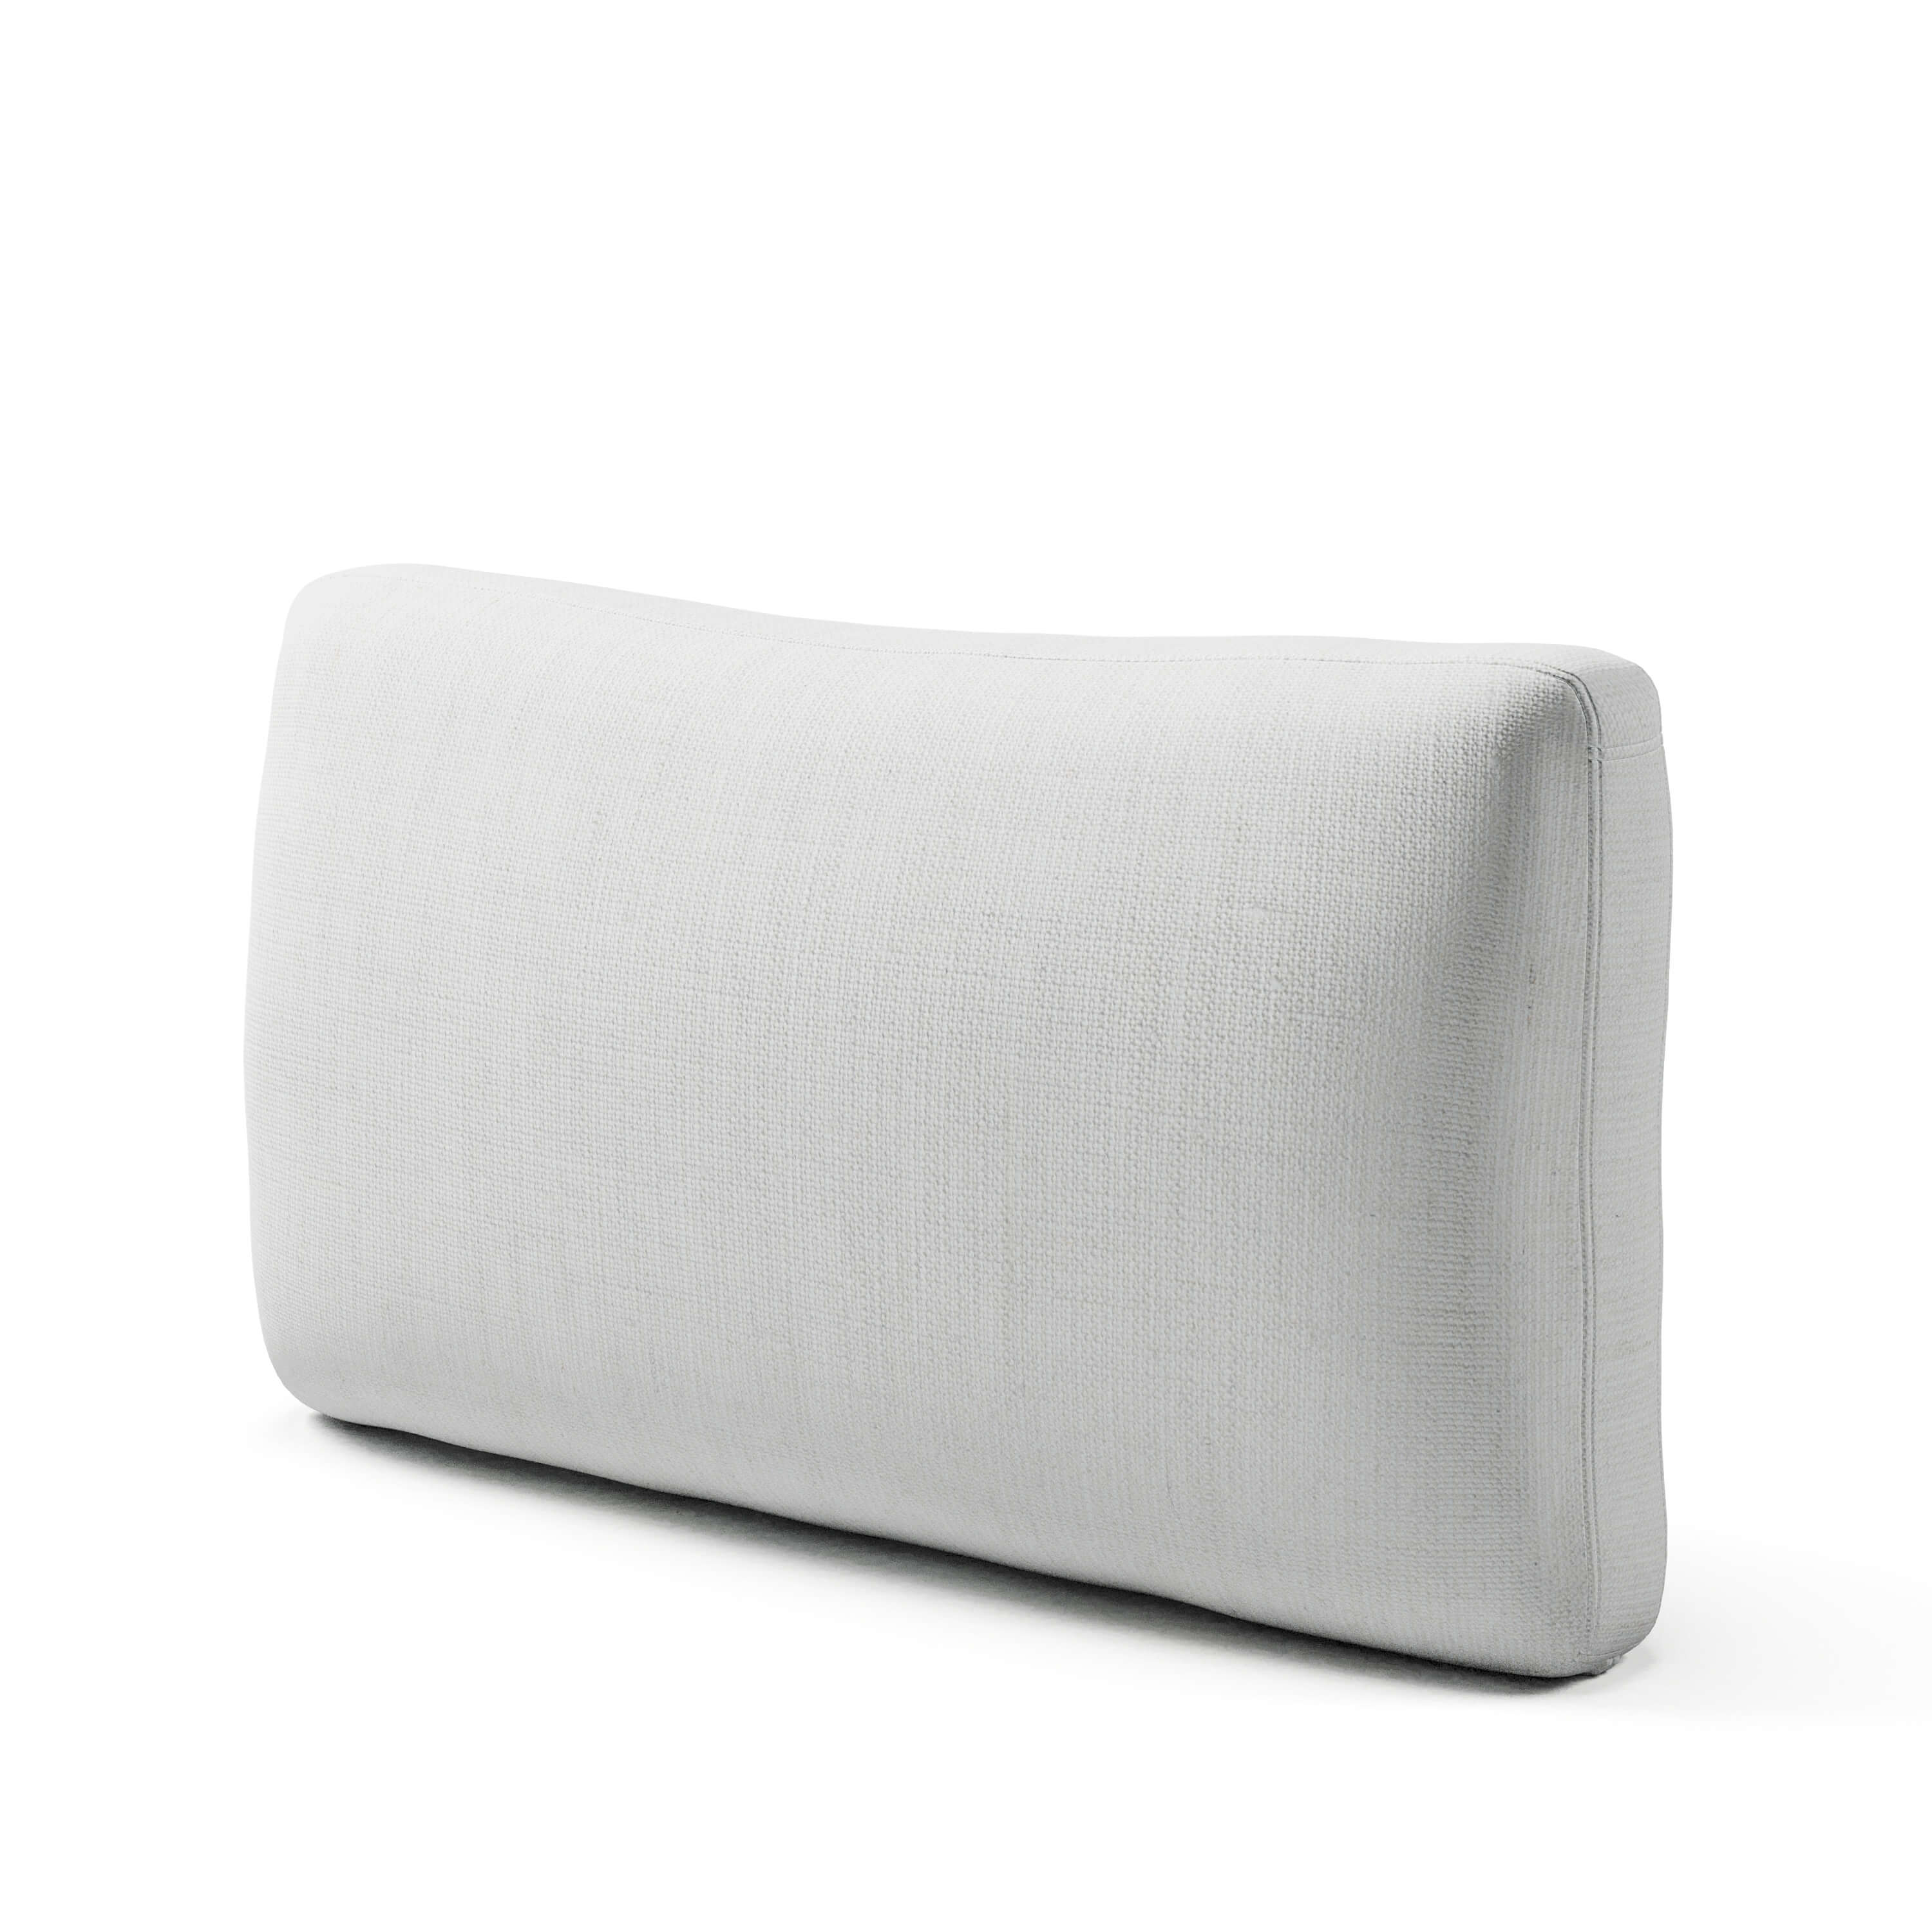 Comfy Sofa - Back Cushion Replacement